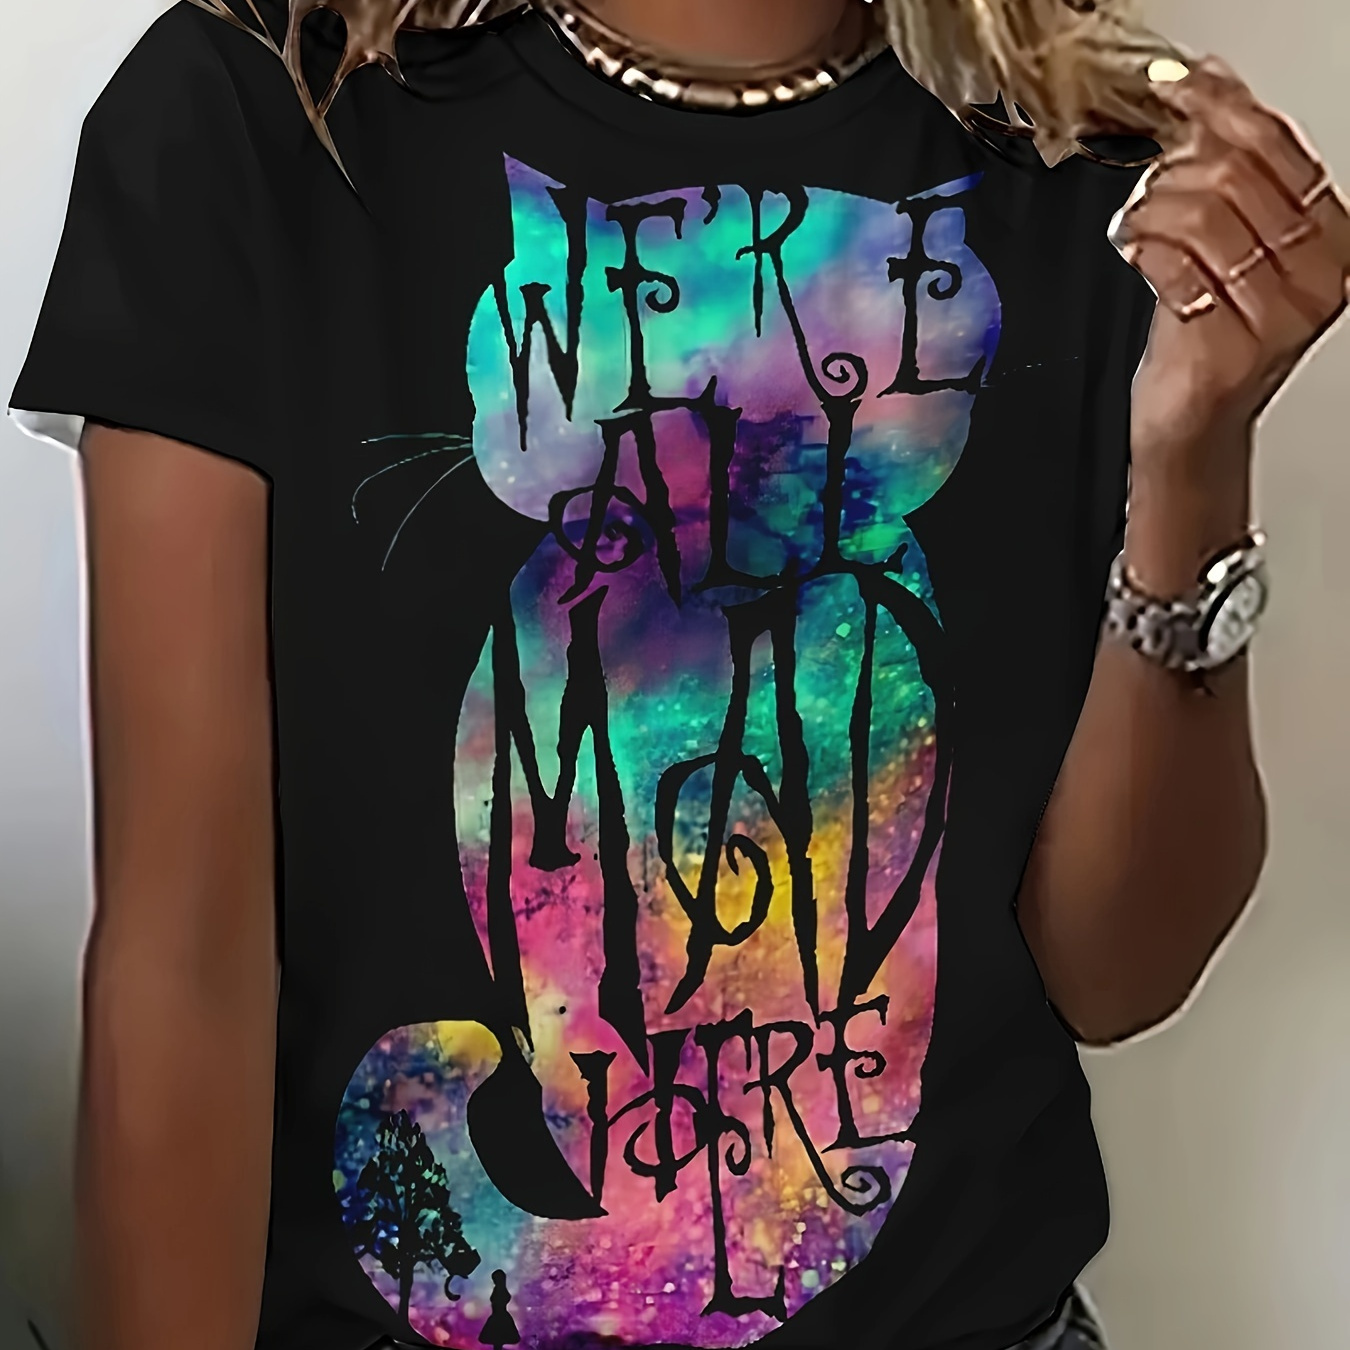 

Women's Print T-shirt, Colorful Cat Silhouette Graphic, Casual Short Sleeve Tee, "we're All Mad Here" Quote, Crew Neck